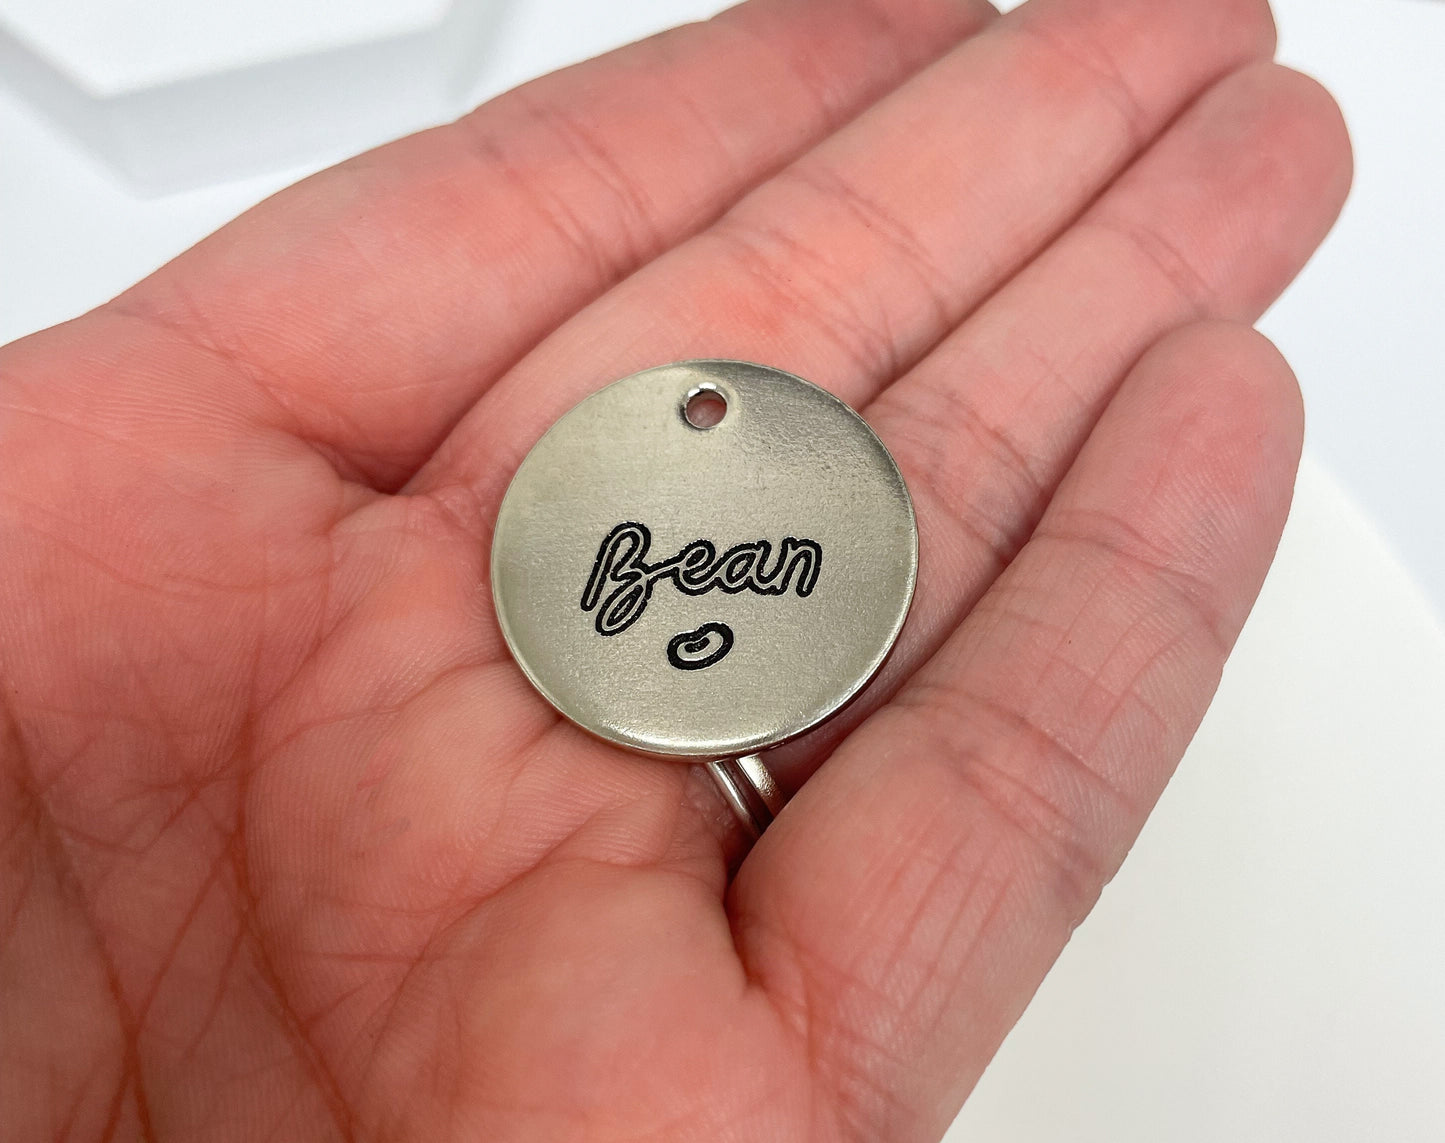 Personalized Dog Tag - Bean Design Engraved Dog Tag - Cat ID Tag - Dog Collar Tag - Custom Dog Tag - Personalized Tag - Pet ID Tag - Pet Name Tag - Cat Collar Tag - Bean Dog Tag - Jelly Bean Dog Tag - Dog Gear - Dog Accessories - Pet Accessories